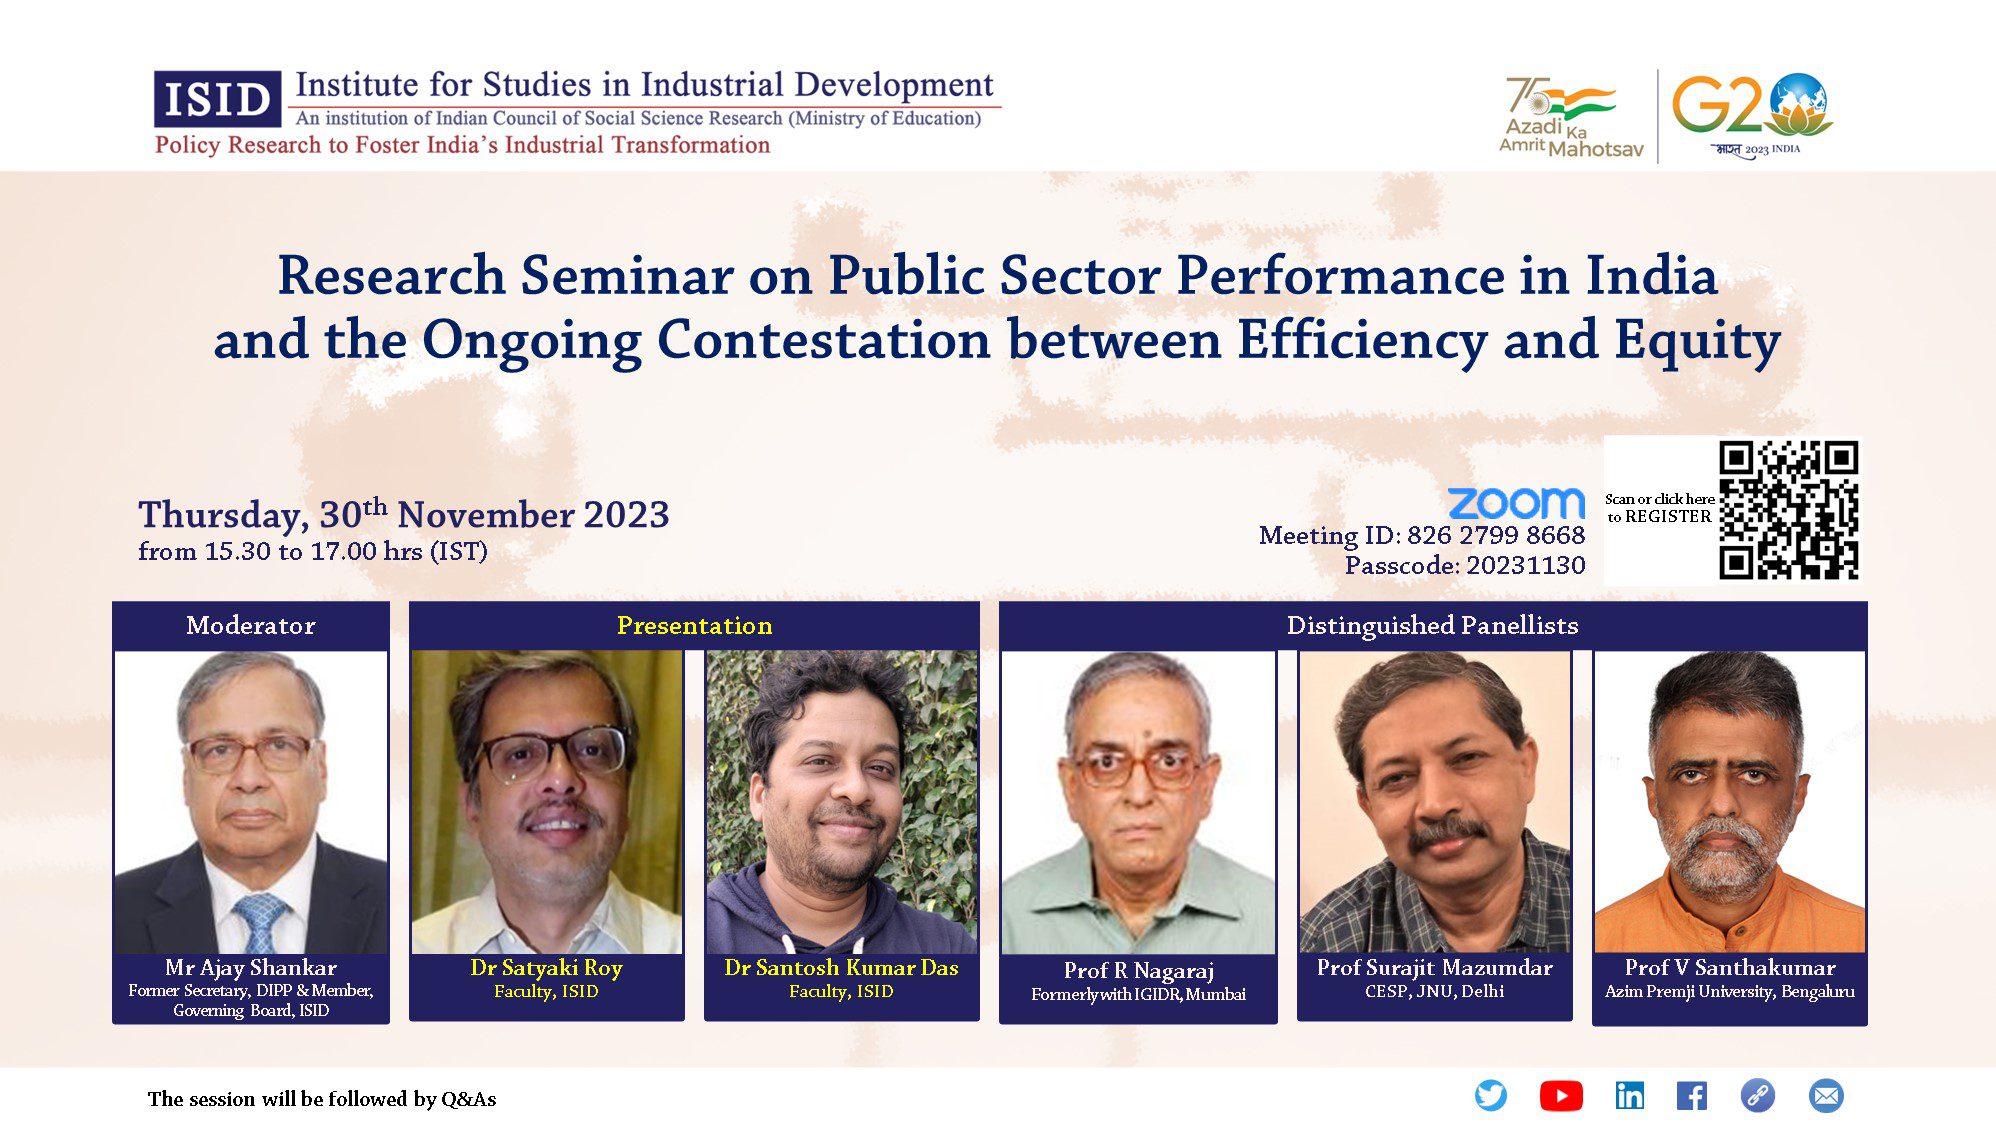 Research Seminar on Public Sector Performance in India and the Ongoing Contestation between Efficiency and Equity